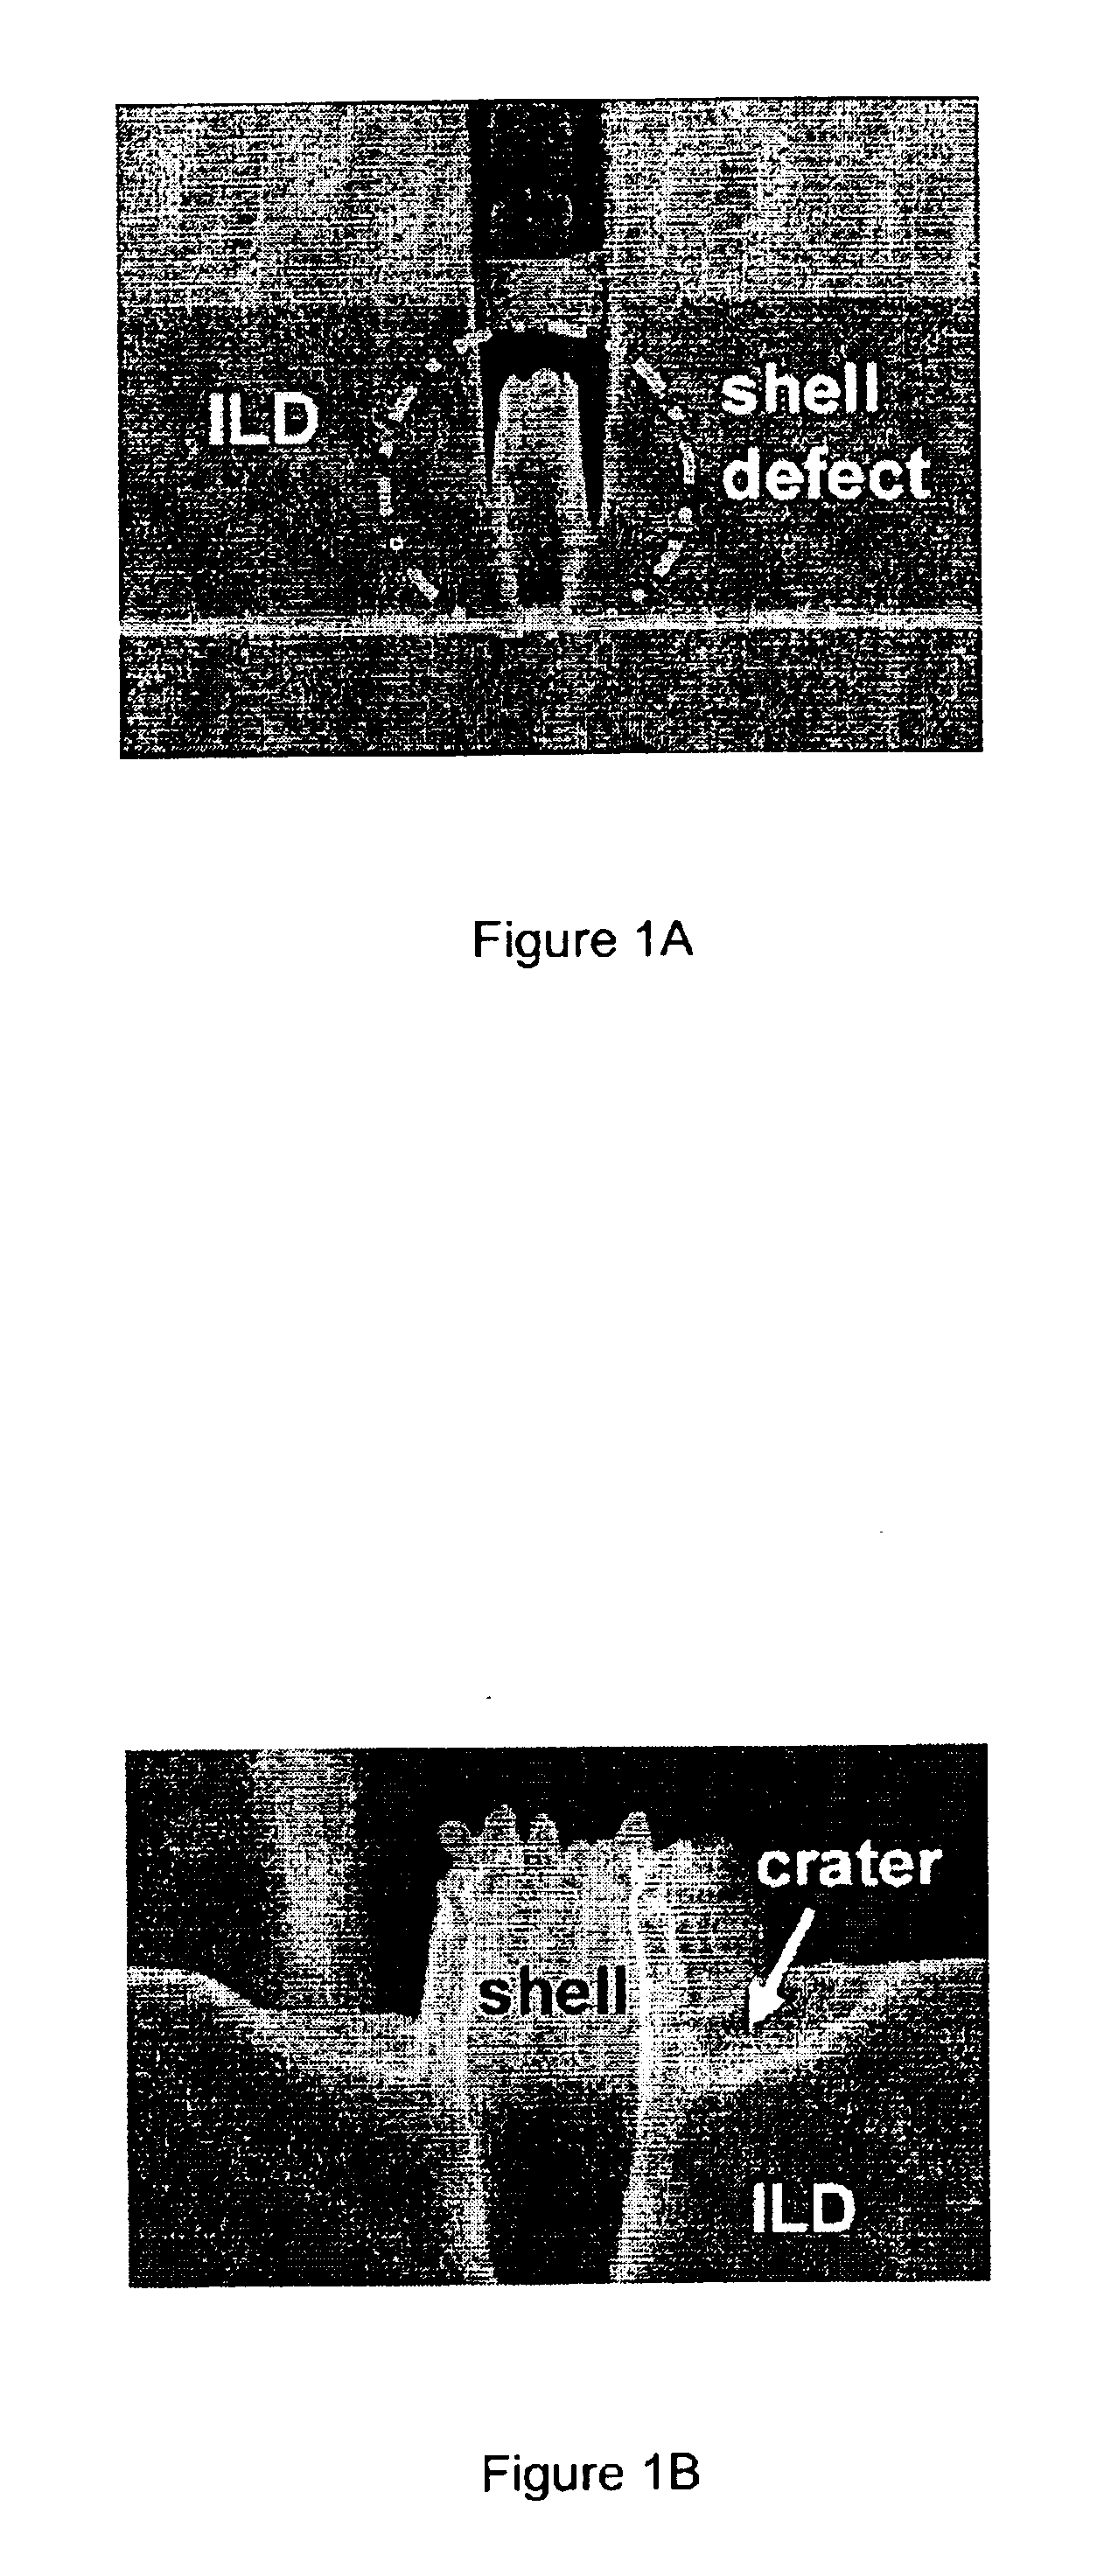 Polymer sacrificial light absorbing structure and method